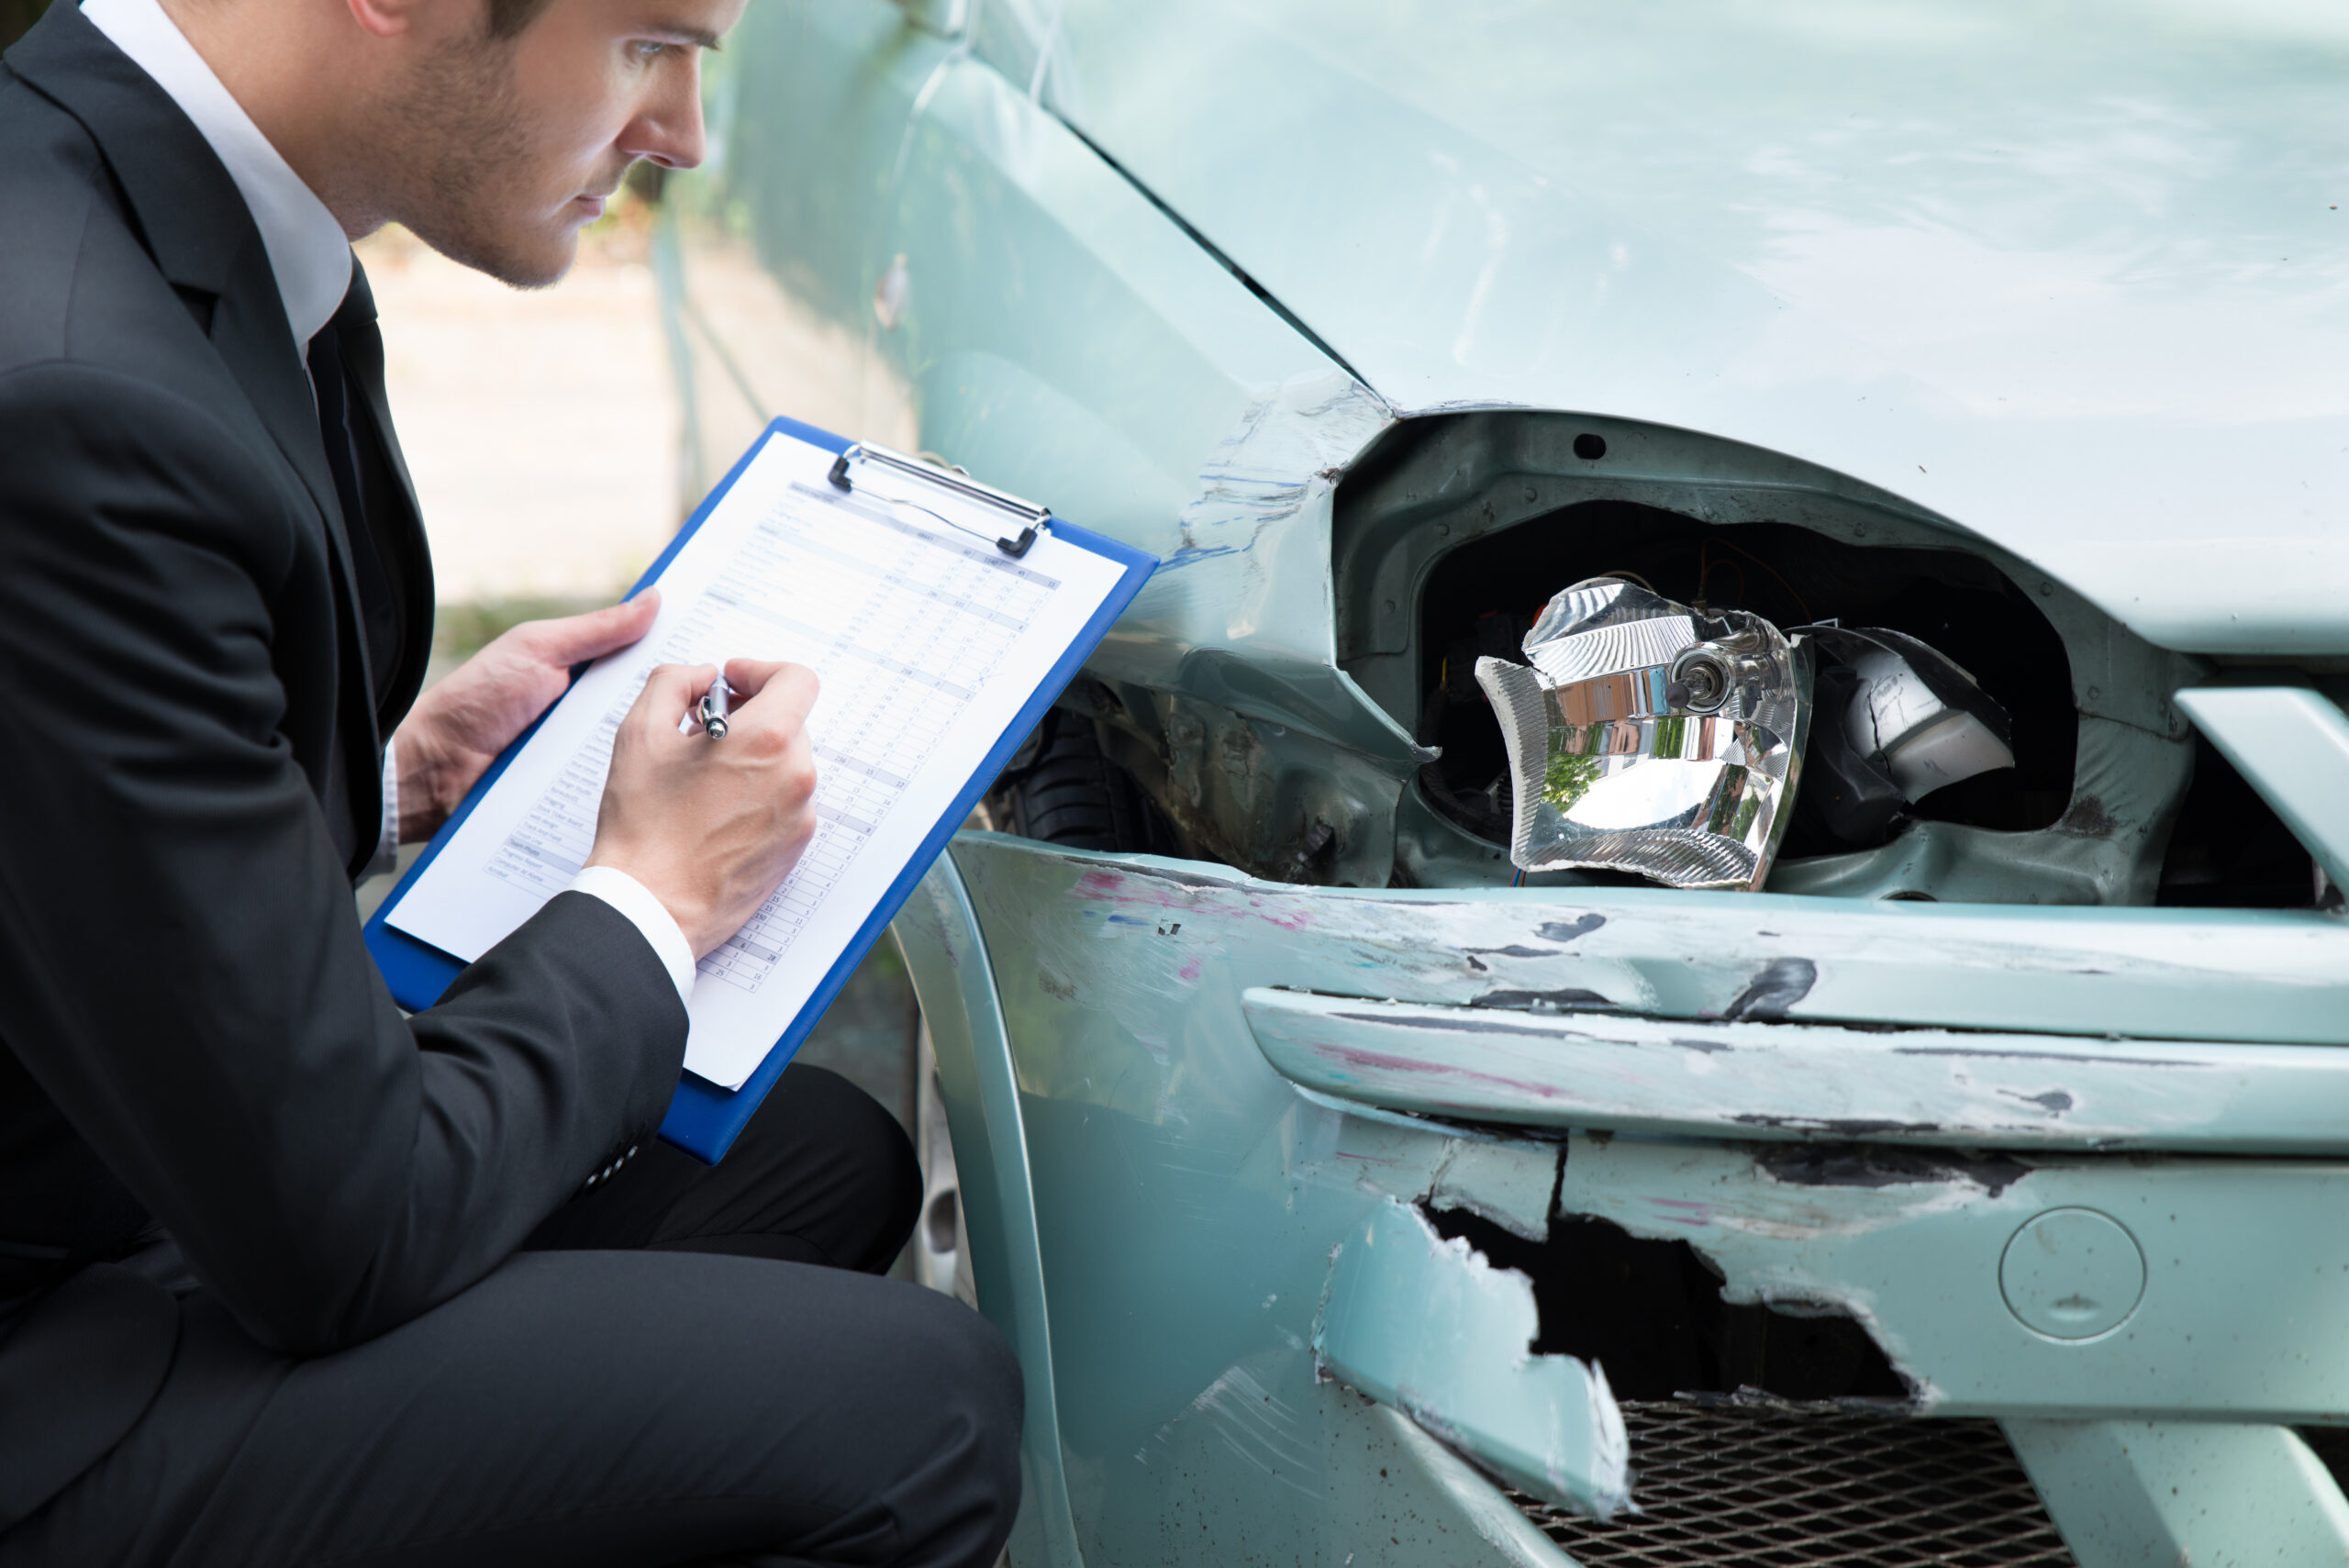 How Car Insurance Companies Determine Fault in an Accident